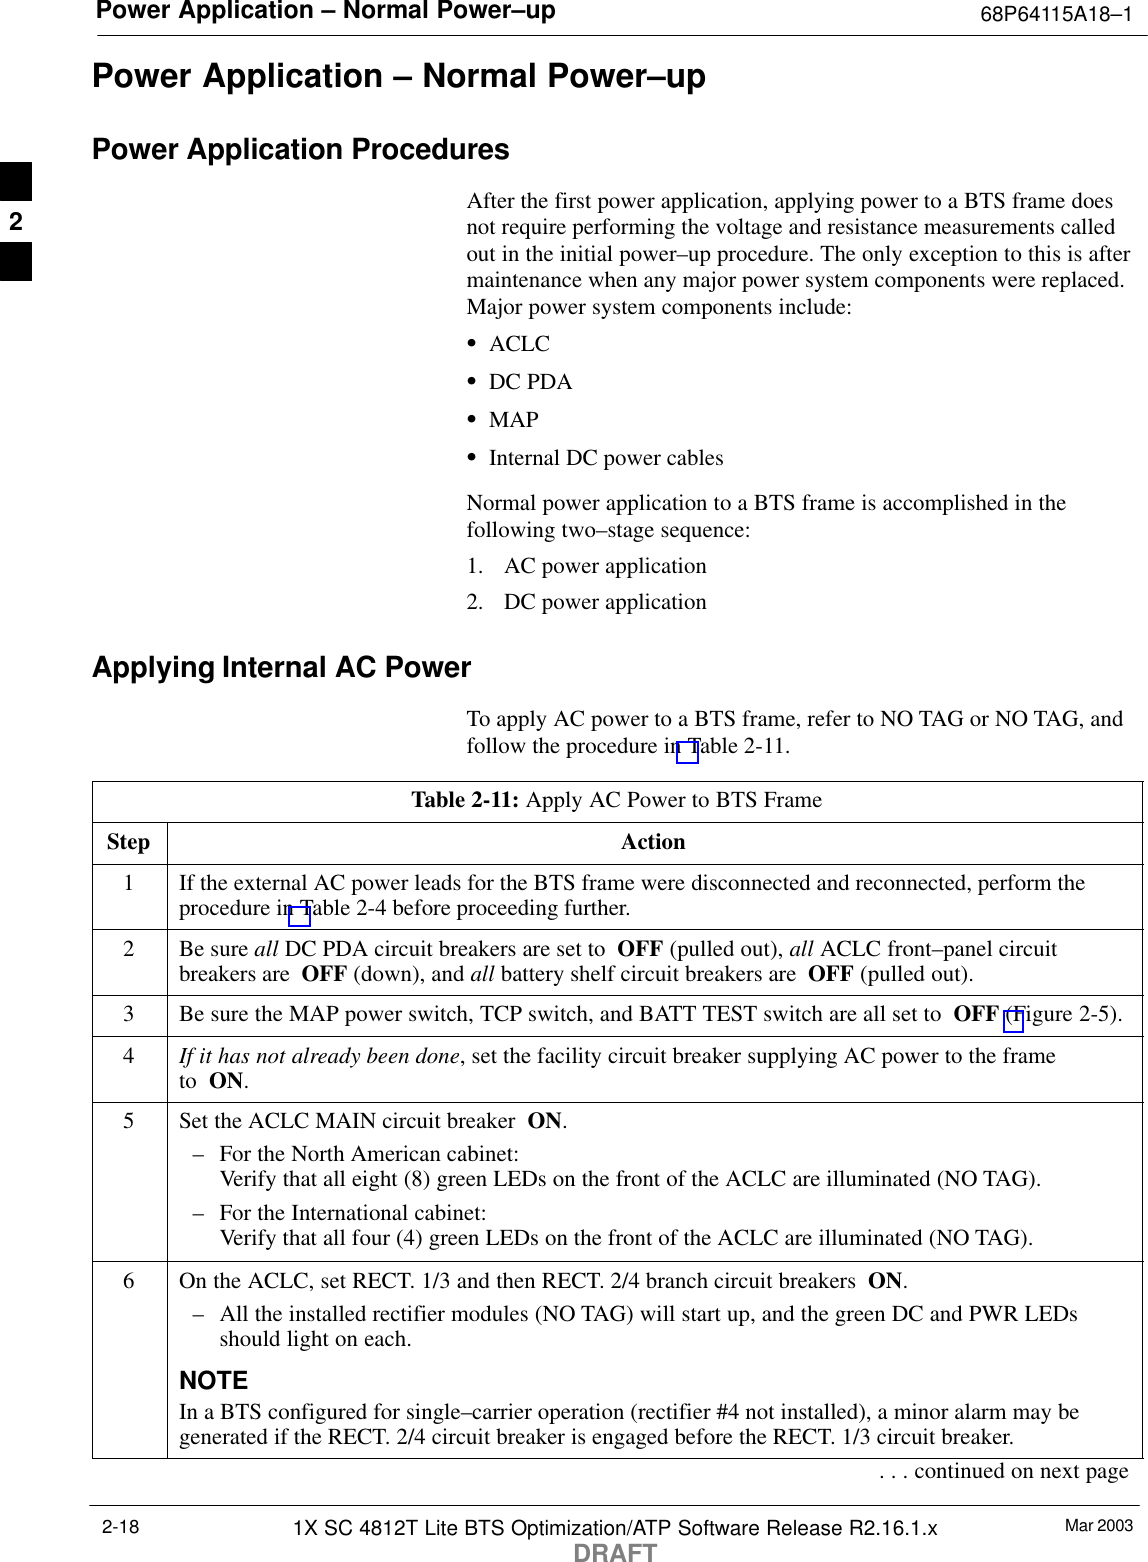 Power Application – Normal Power–up 68P64115A18–1Mar 20031X SC 4812T Lite BTS Optimization/ATP Software Release R2.16.1.xDRAFT2-18Power Application – Normal Power–upPower Application ProceduresAfter the first power application, applying power to a BTS frame doesnot require performing the voltage and resistance measurements calledout in the initial power–up procedure. The only exception to this is aftermaintenance when any major power system components were replaced.Major power system components include:SACLCSDC PDASMAPSInternal DC power cablesNormal power application to a BTS frame is accomplished in thefollowing two–stage sequence:1. AC power application2. DC power applicationApplying Internal AC PowerTo apply AC power to a BTS frame, refer to NO TAG or NO TAG, andfollow the procedure in Table 2-11.Table 2-11: Apply AC Power to BTS FrameStep Action1If the external AC power leads for the BTS frame were disconnected and reconnected, perform theprocedure in Table 2-4 before proceeding further.2Be sure all DC PDA circuit breakers are set to  OFF (pulled out), all ACLC front–panel circuitbreakers are  OFF (down), and all battery shelf circuit breakers are  OFF (pulled out).3Be sure the MAP power switch, TCP switch, and BATT TEST switch are all set to  OFF (Figure 2-5).4If it has not already been done, set the facility circuit breaker supplying AC power to the frame to  ON.5Set the ACLC MAIN circuit breaker  ON.– For the North American cabinet:Verify that all eight (8) green LEDs on the front of the ACLC are illuminated (NO TAG).– For the International cabinet:Verify that all four (4) green LEDs on the front of the ACLC are illuminated (NO TAG).6On the ACLC, set RECT. 1/3 and then RECT. 2/4 branch circuit breakers  ON.– All the installed rectifier modules (NO TAG) will start up, and the green DC and PWR LEDsshould light on each.NOTEIn a BTS configured for single–carrier operation (rectifier #4 not installed), a minor alarm may begenerated if the RECT. 2/4 circuit breaker is engaged before the RECT. 1/3 circuit breaker.. . . continued on next page2